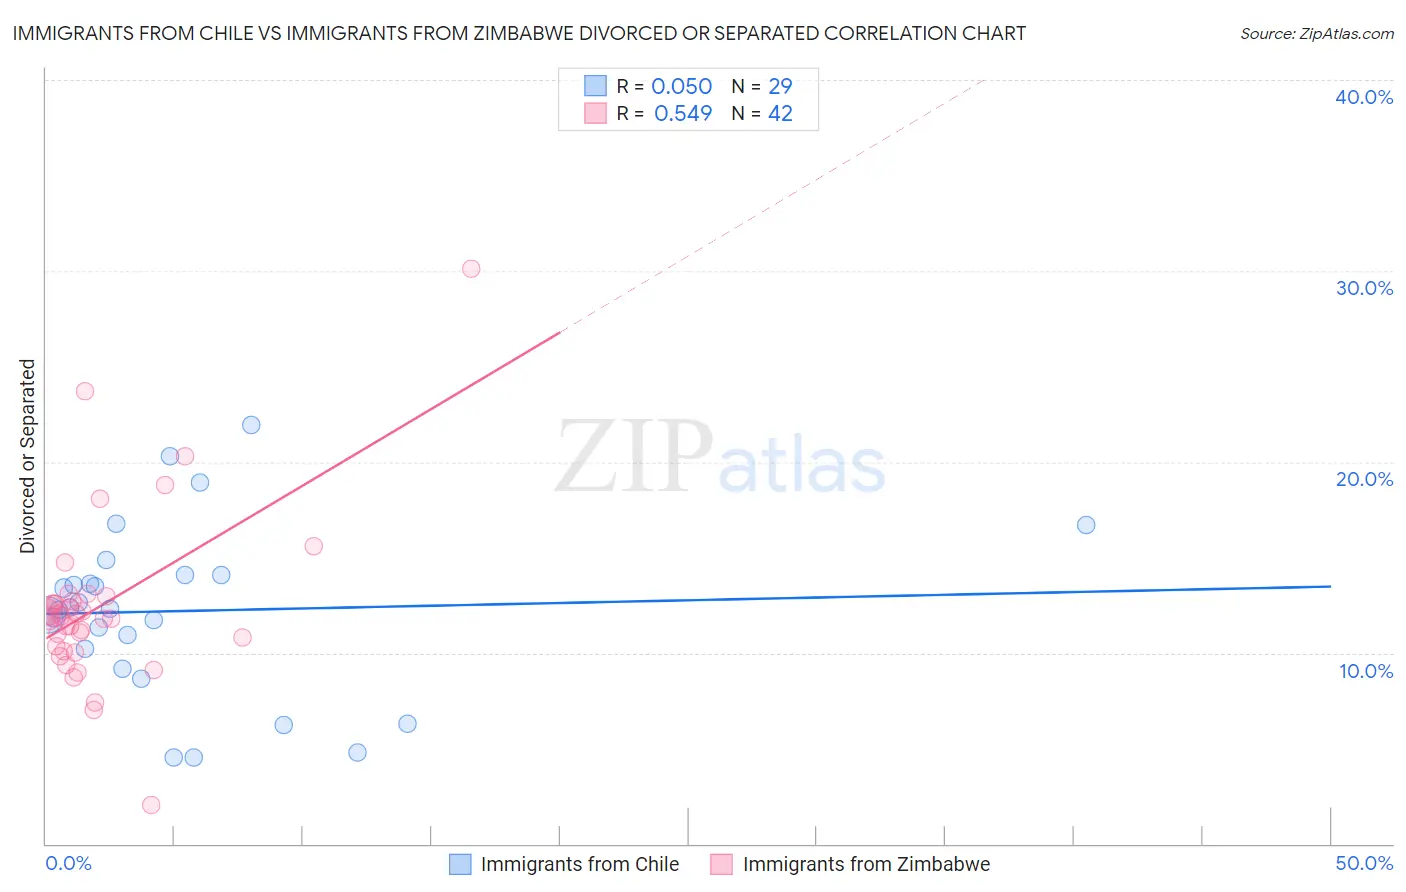 Immigrants from Chile vs Immigrants from Zimbabwe Divorced or Separated